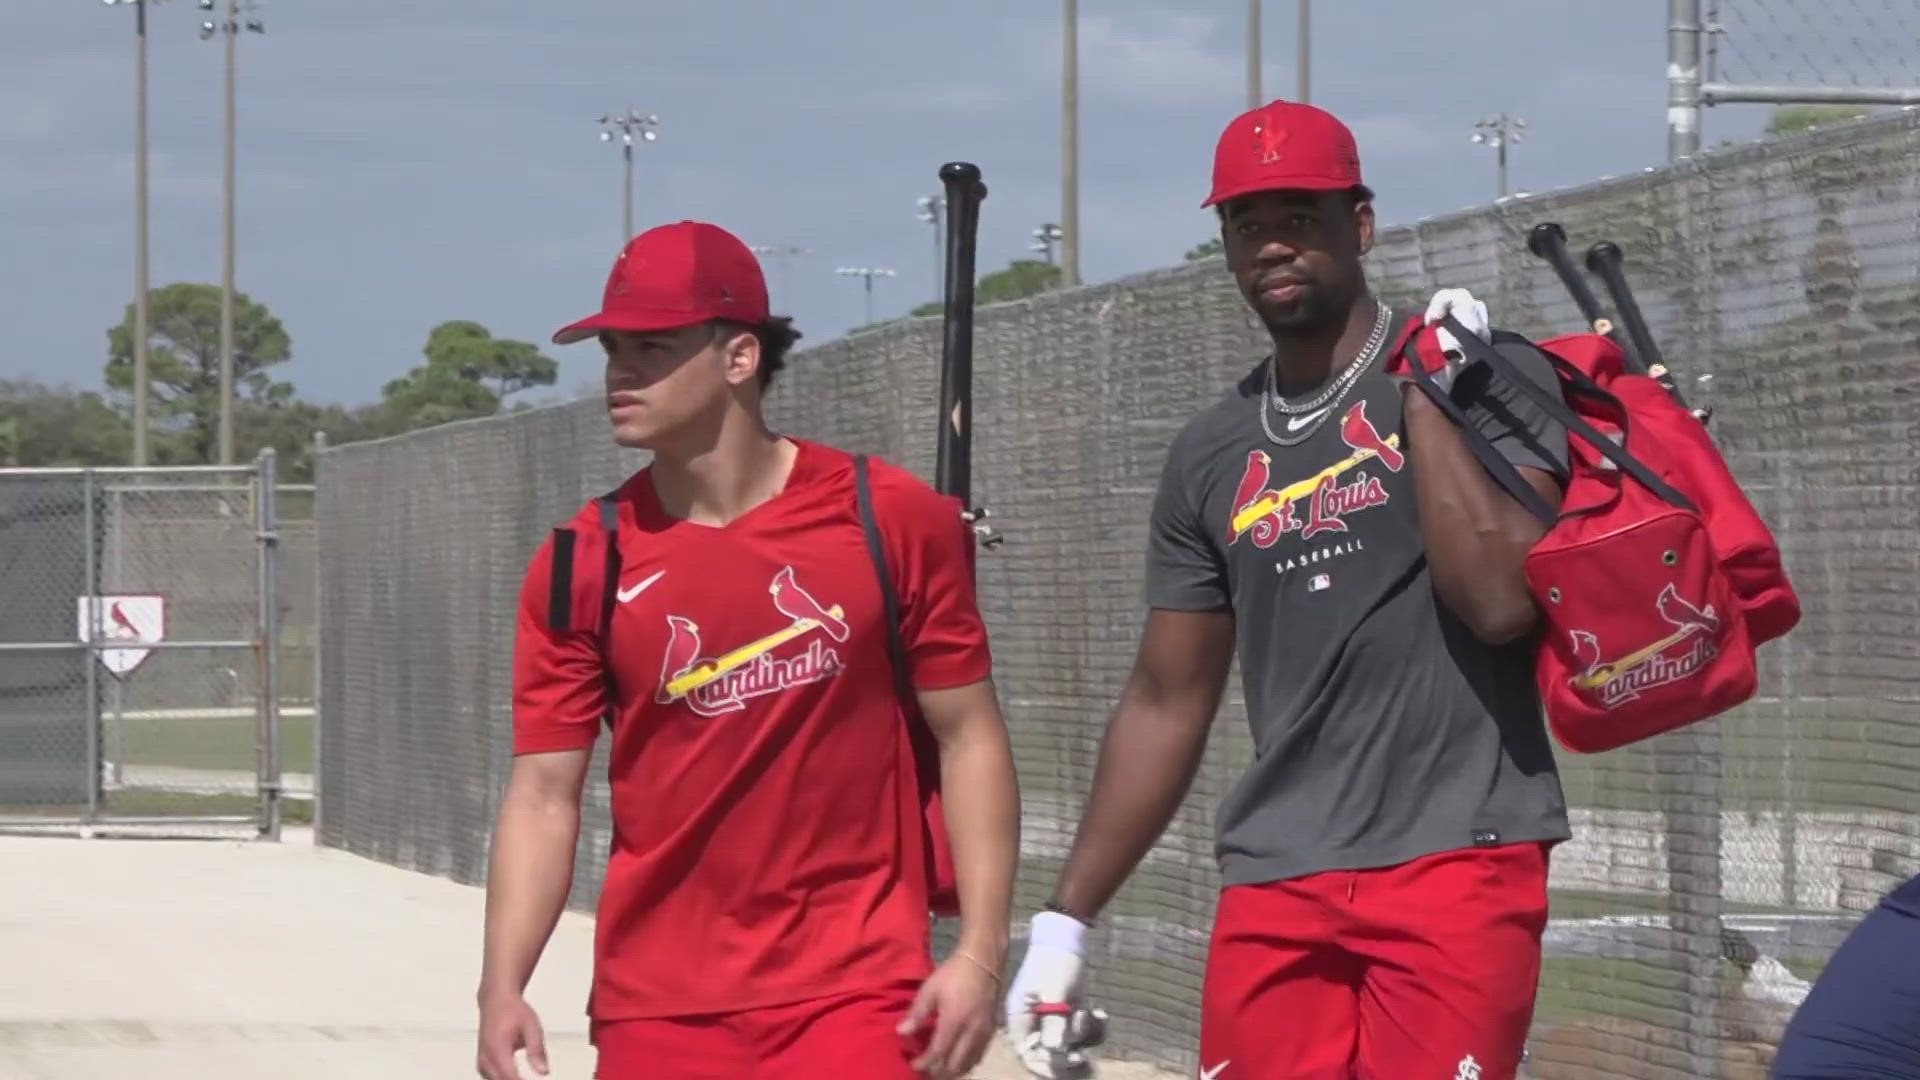 The Cardinals aren't short on top prospects. Here's what some of their big names had to say about their major league dreams at spring training.